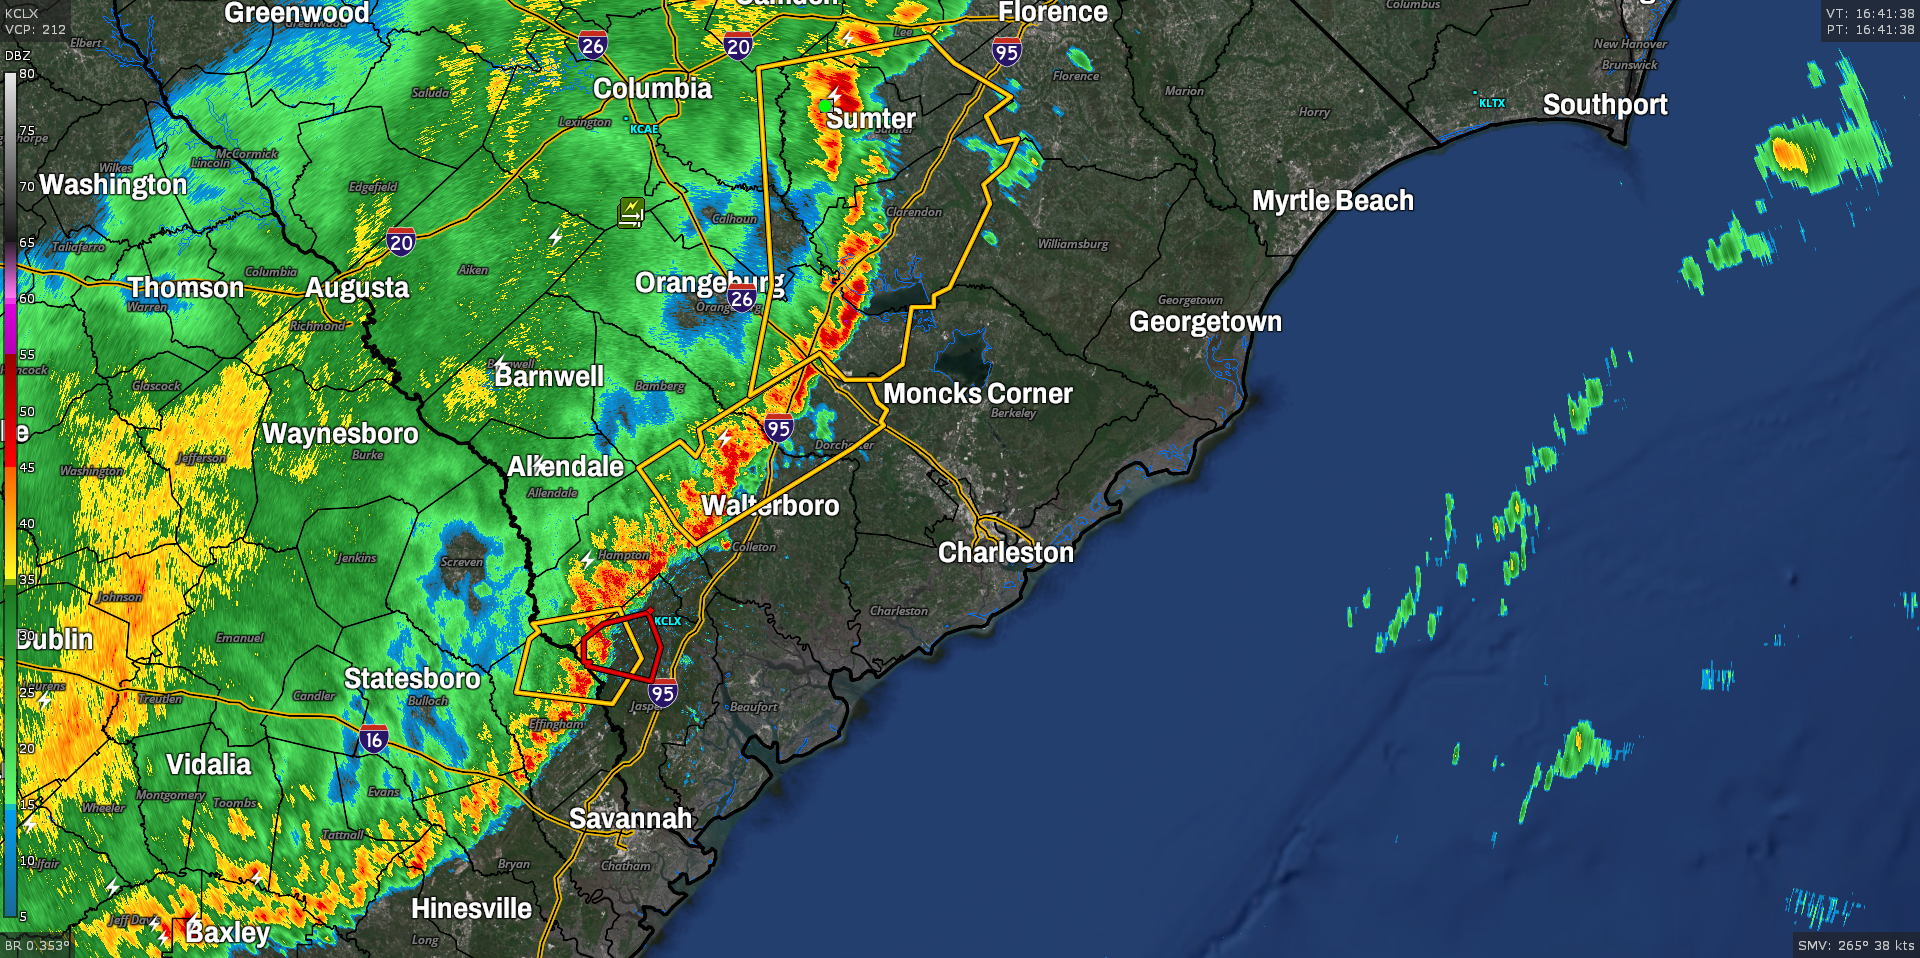 KCLX radar image depicting a line of showers and thunderstorms moving into the Charleston Tri-County region.